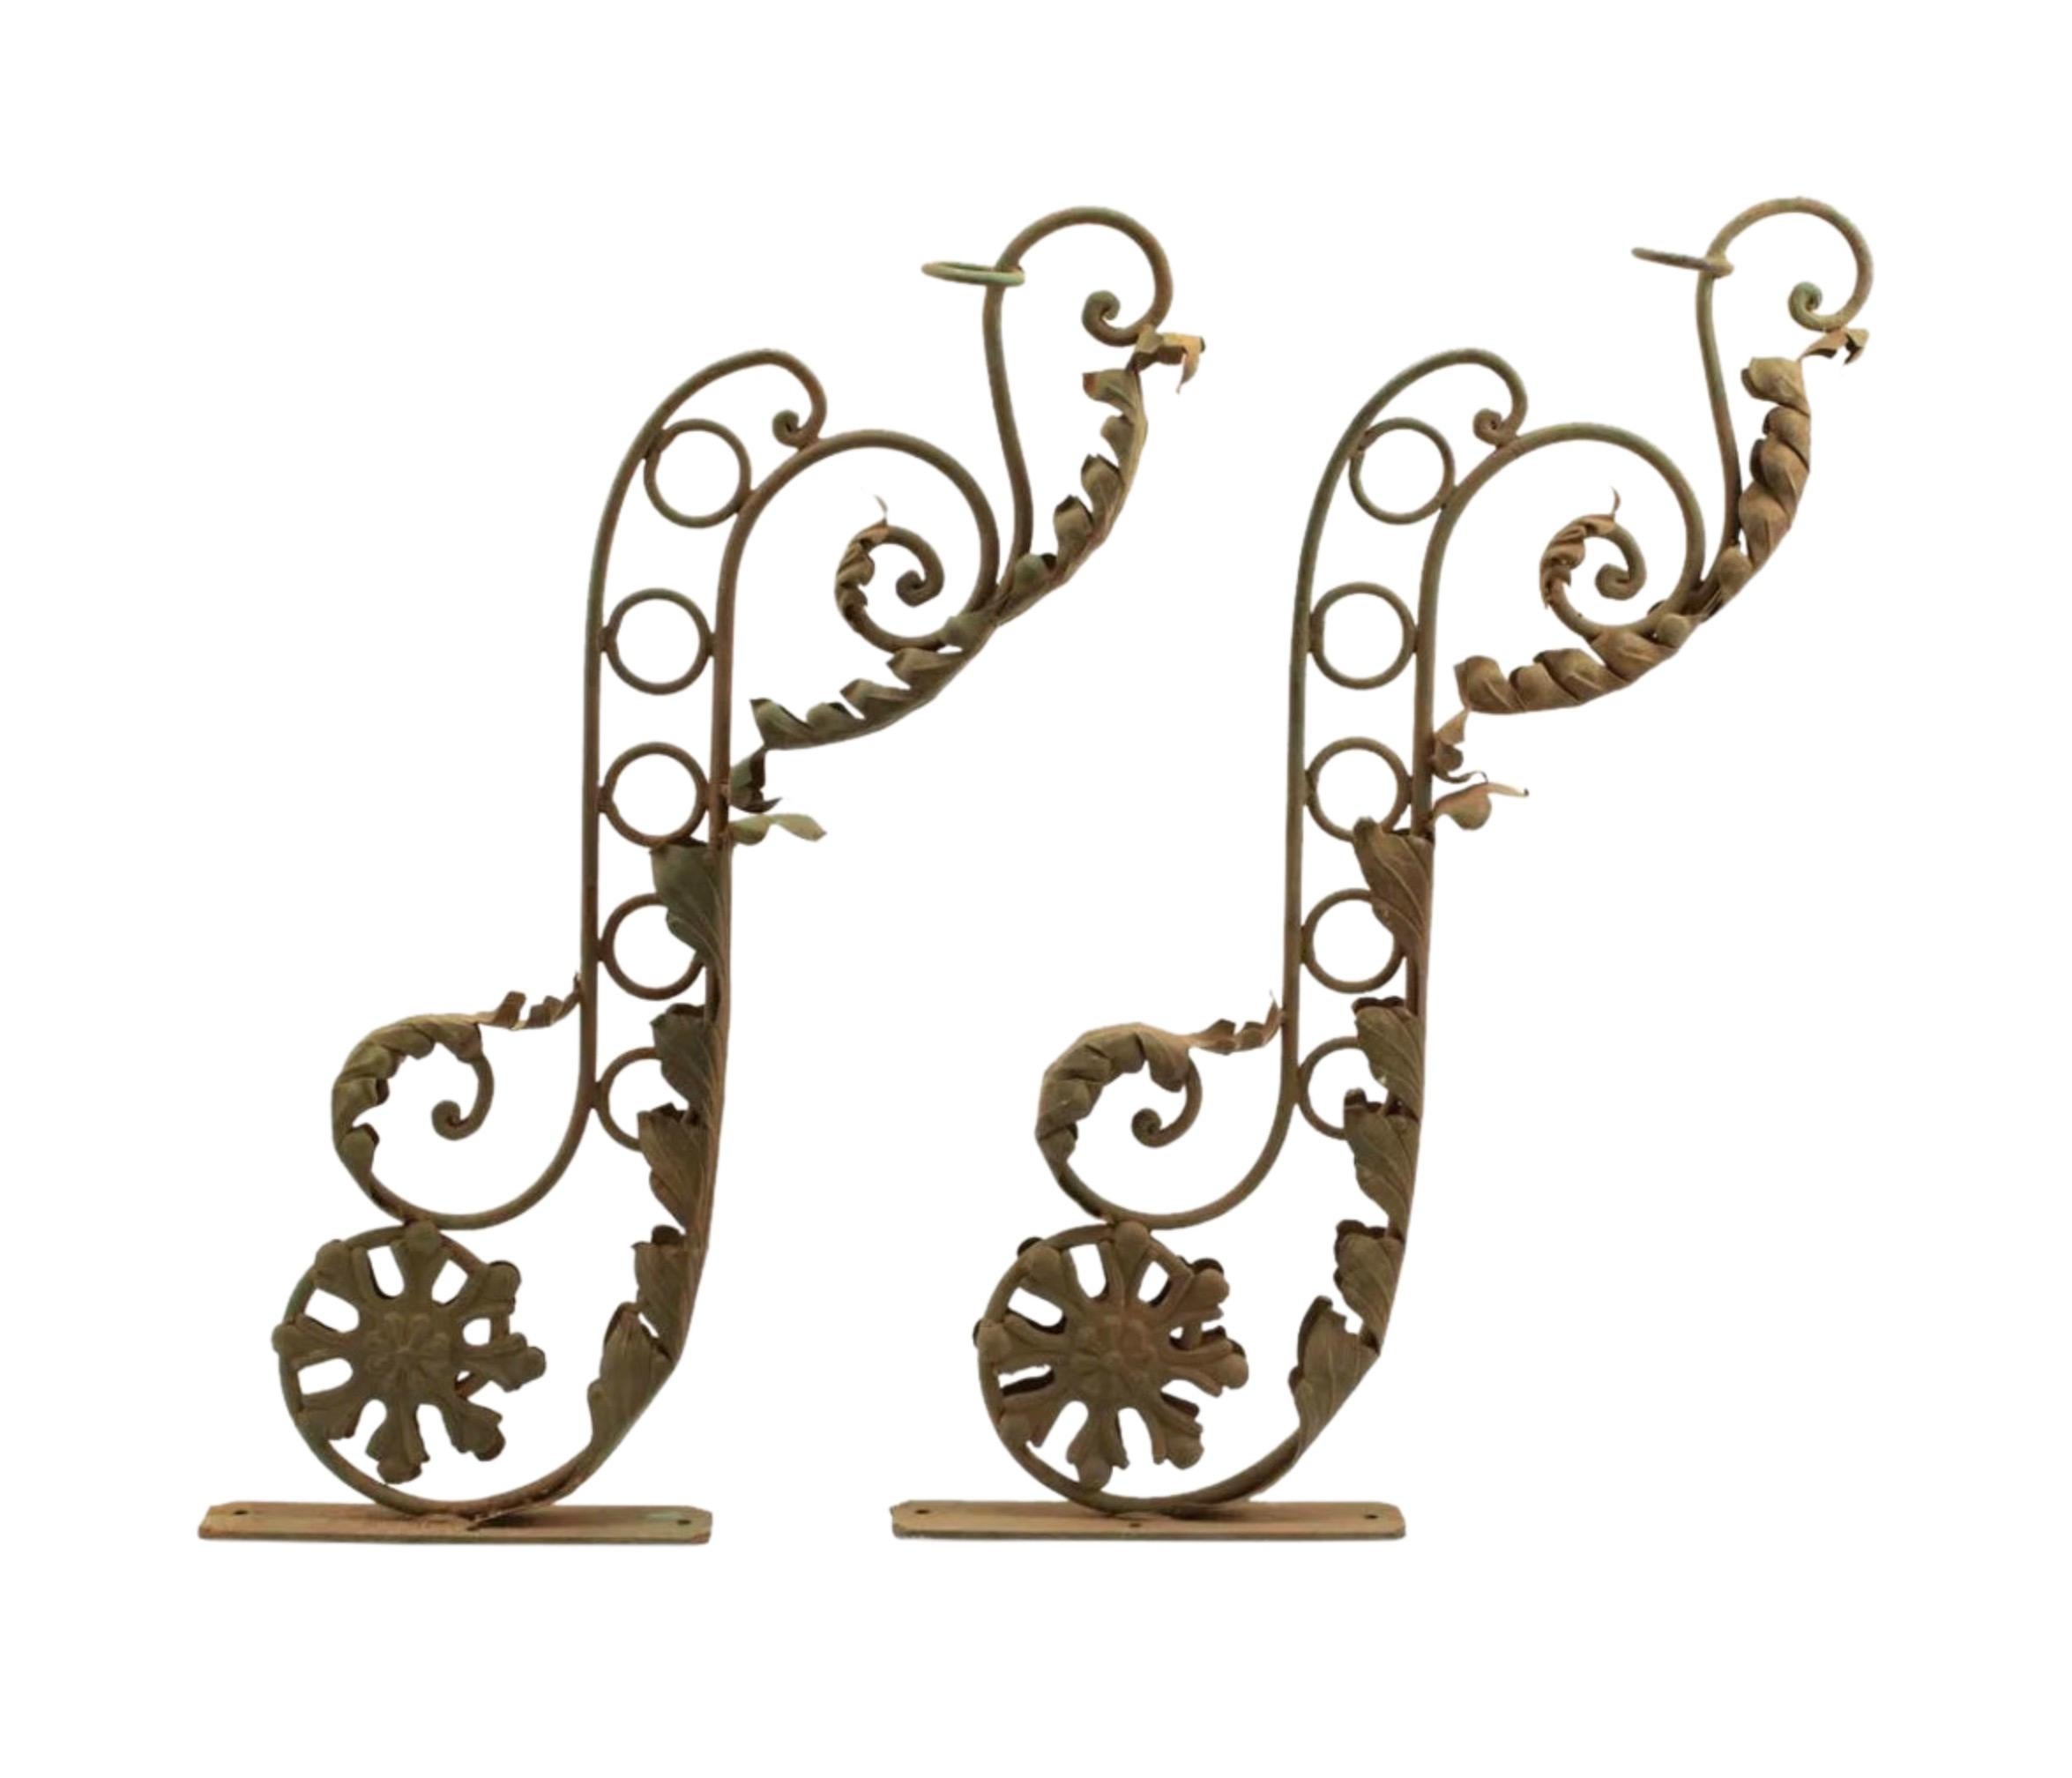 New Orleans Wrought Iron Foliate Scroll Sign Brackets - a Pair For Sale